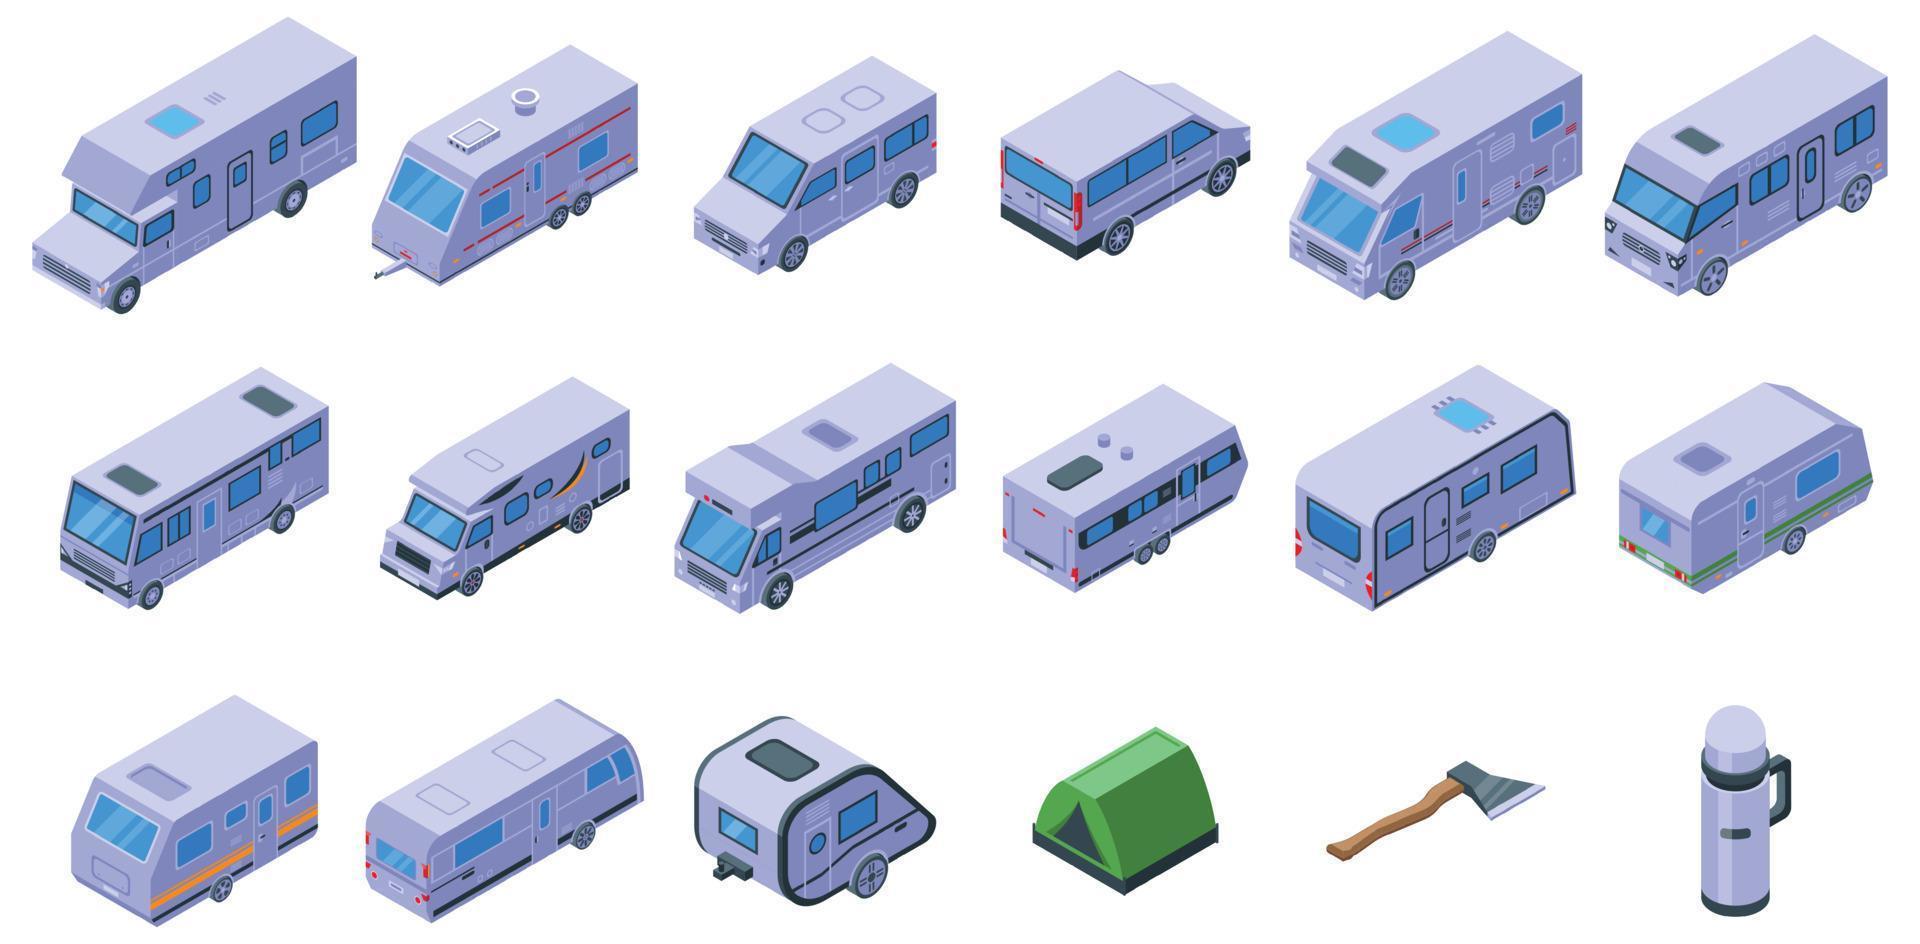 Auto camping icons set, isometric style vector